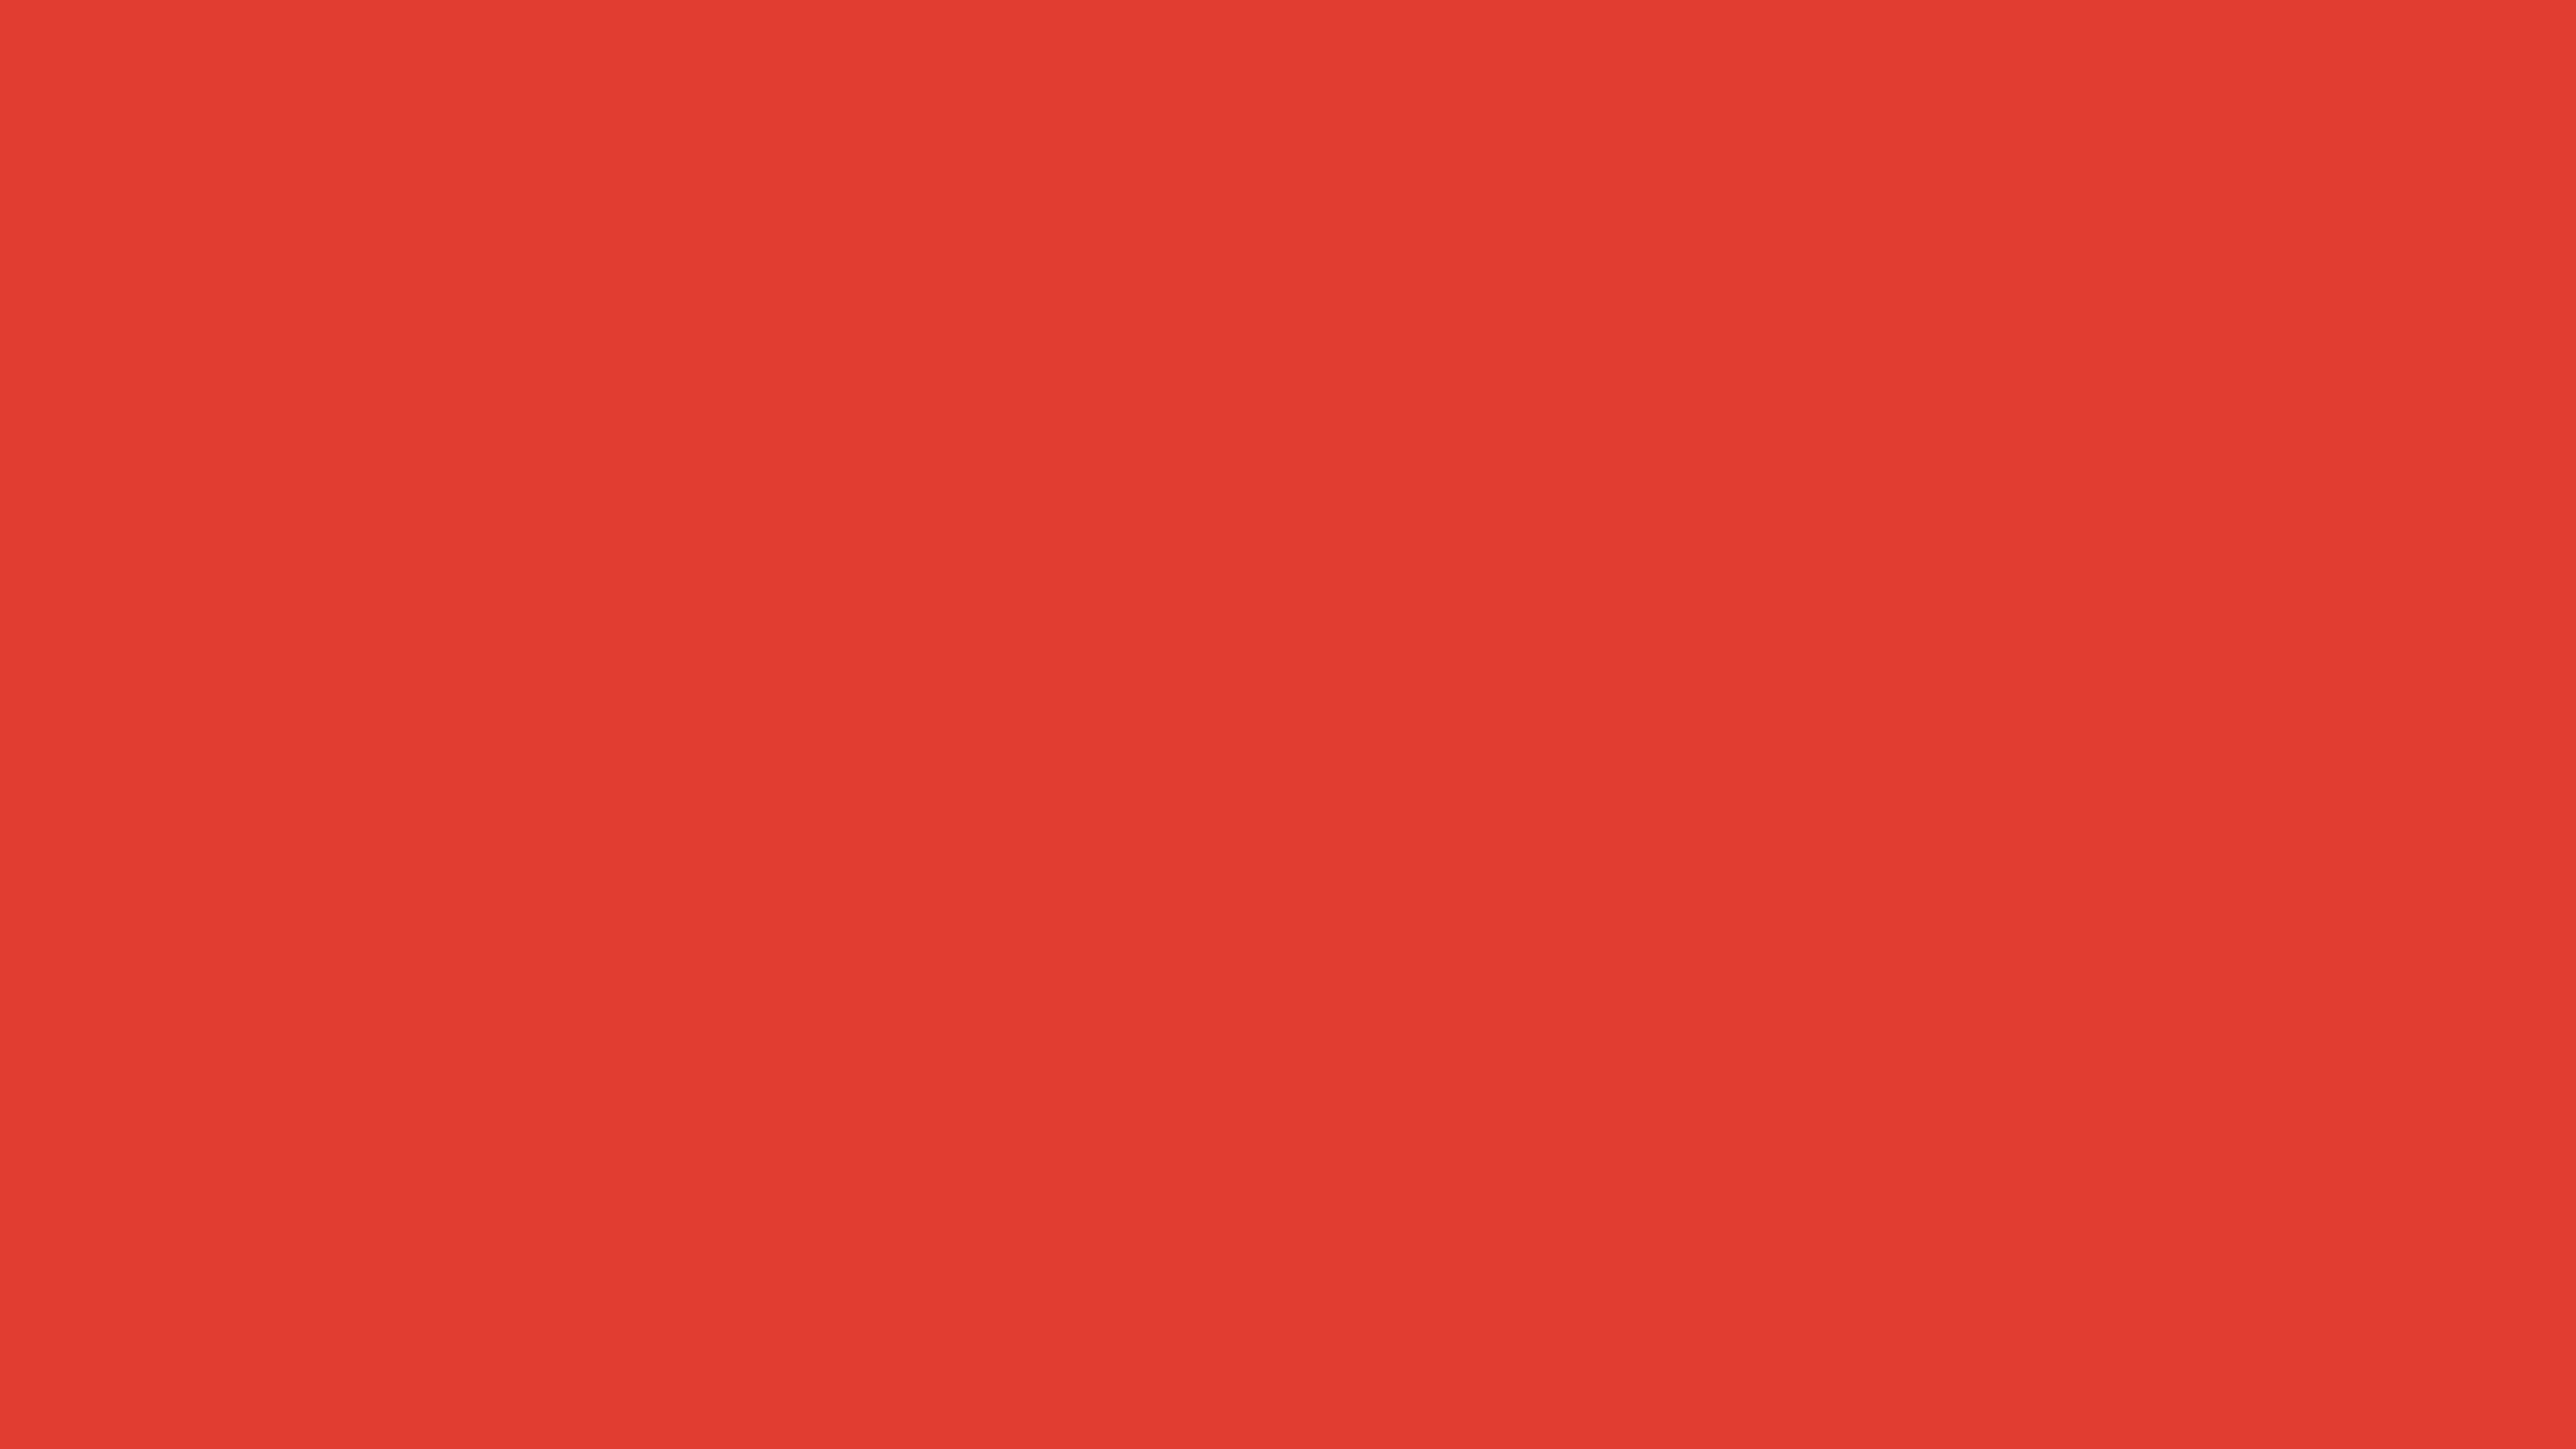 4096x2304 CG Red Solid Color Background